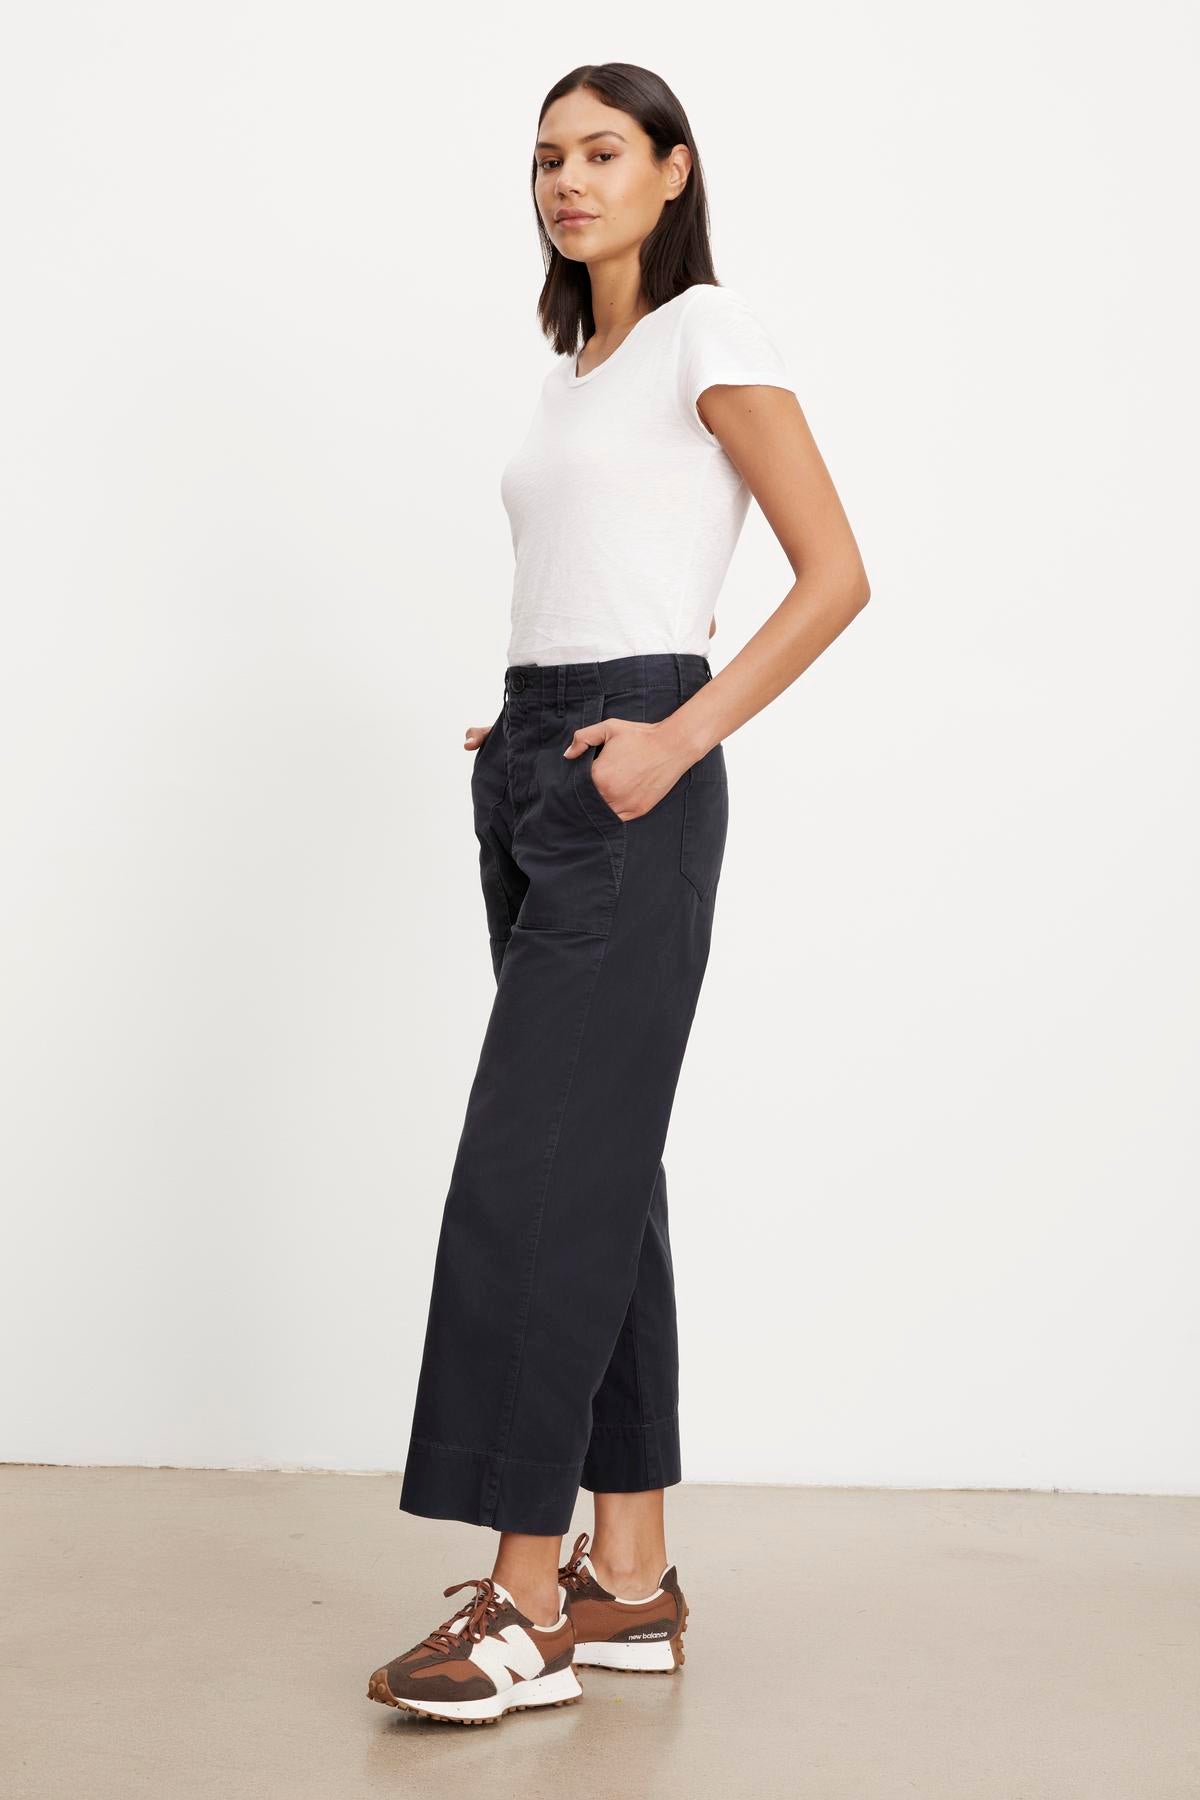 A woman stands casually in a white top, Velvet by Graham & Spencer's MYA cotton canvas pants with a utility silhouette, and brown shoes against a neutral background.-36320657473729